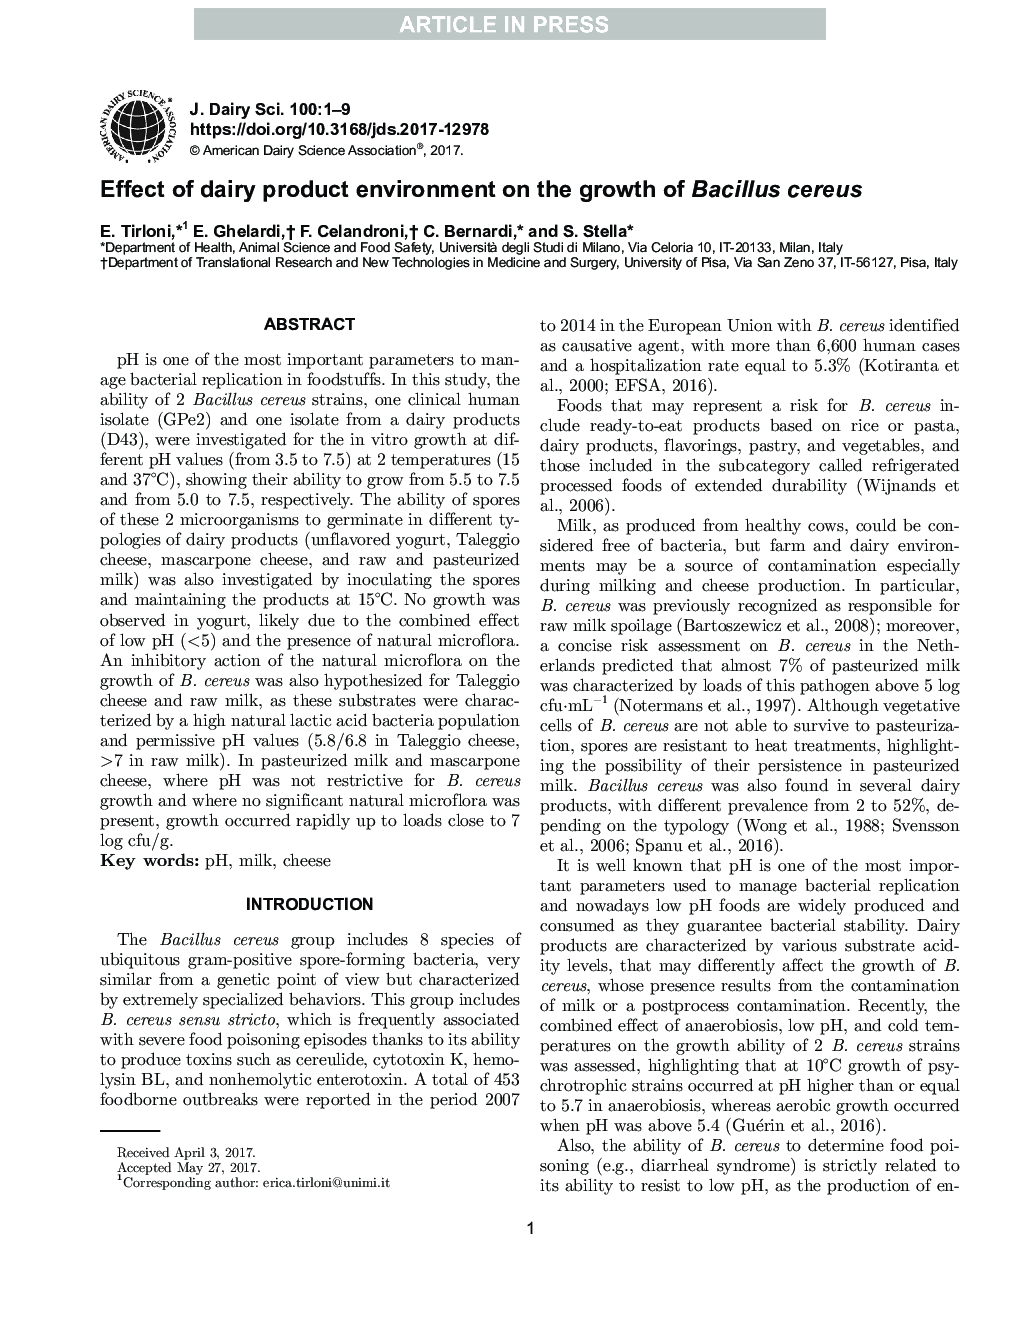 Effect of dairy product environment on the growth of Bacillus cereus